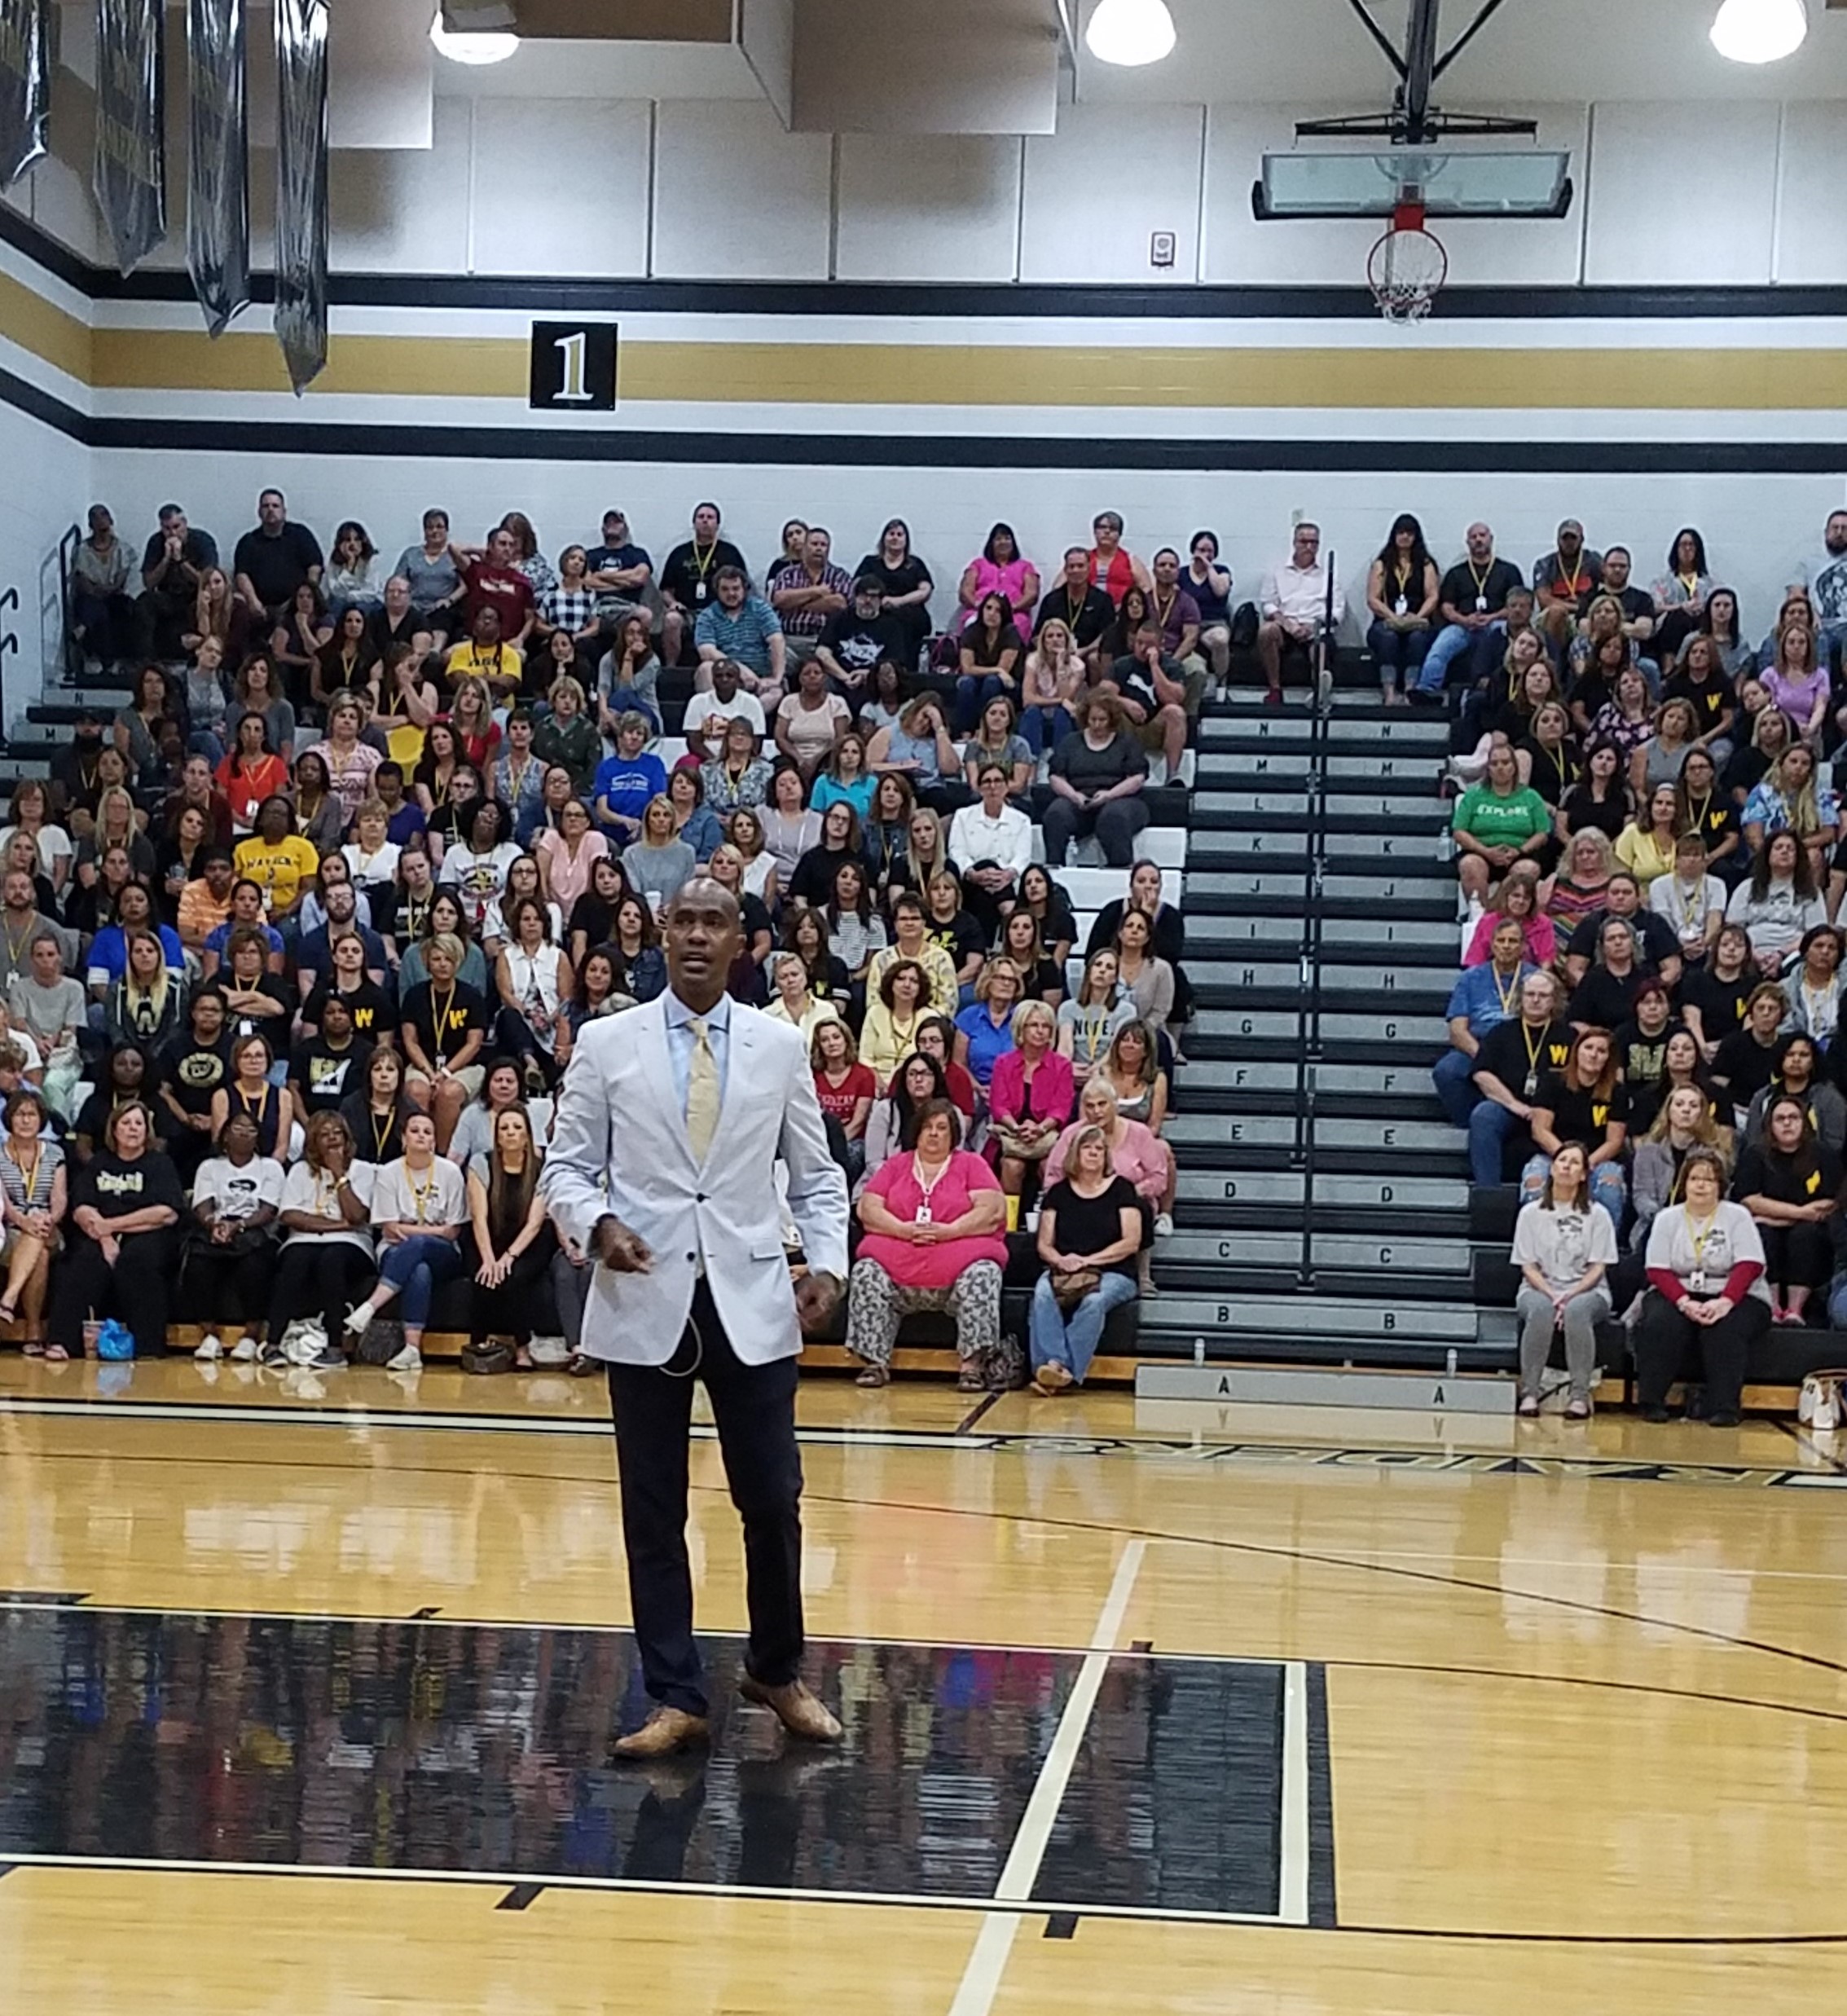 UCLA’s Tyrone Howard discusses Equity, SEL with WCS’ staff